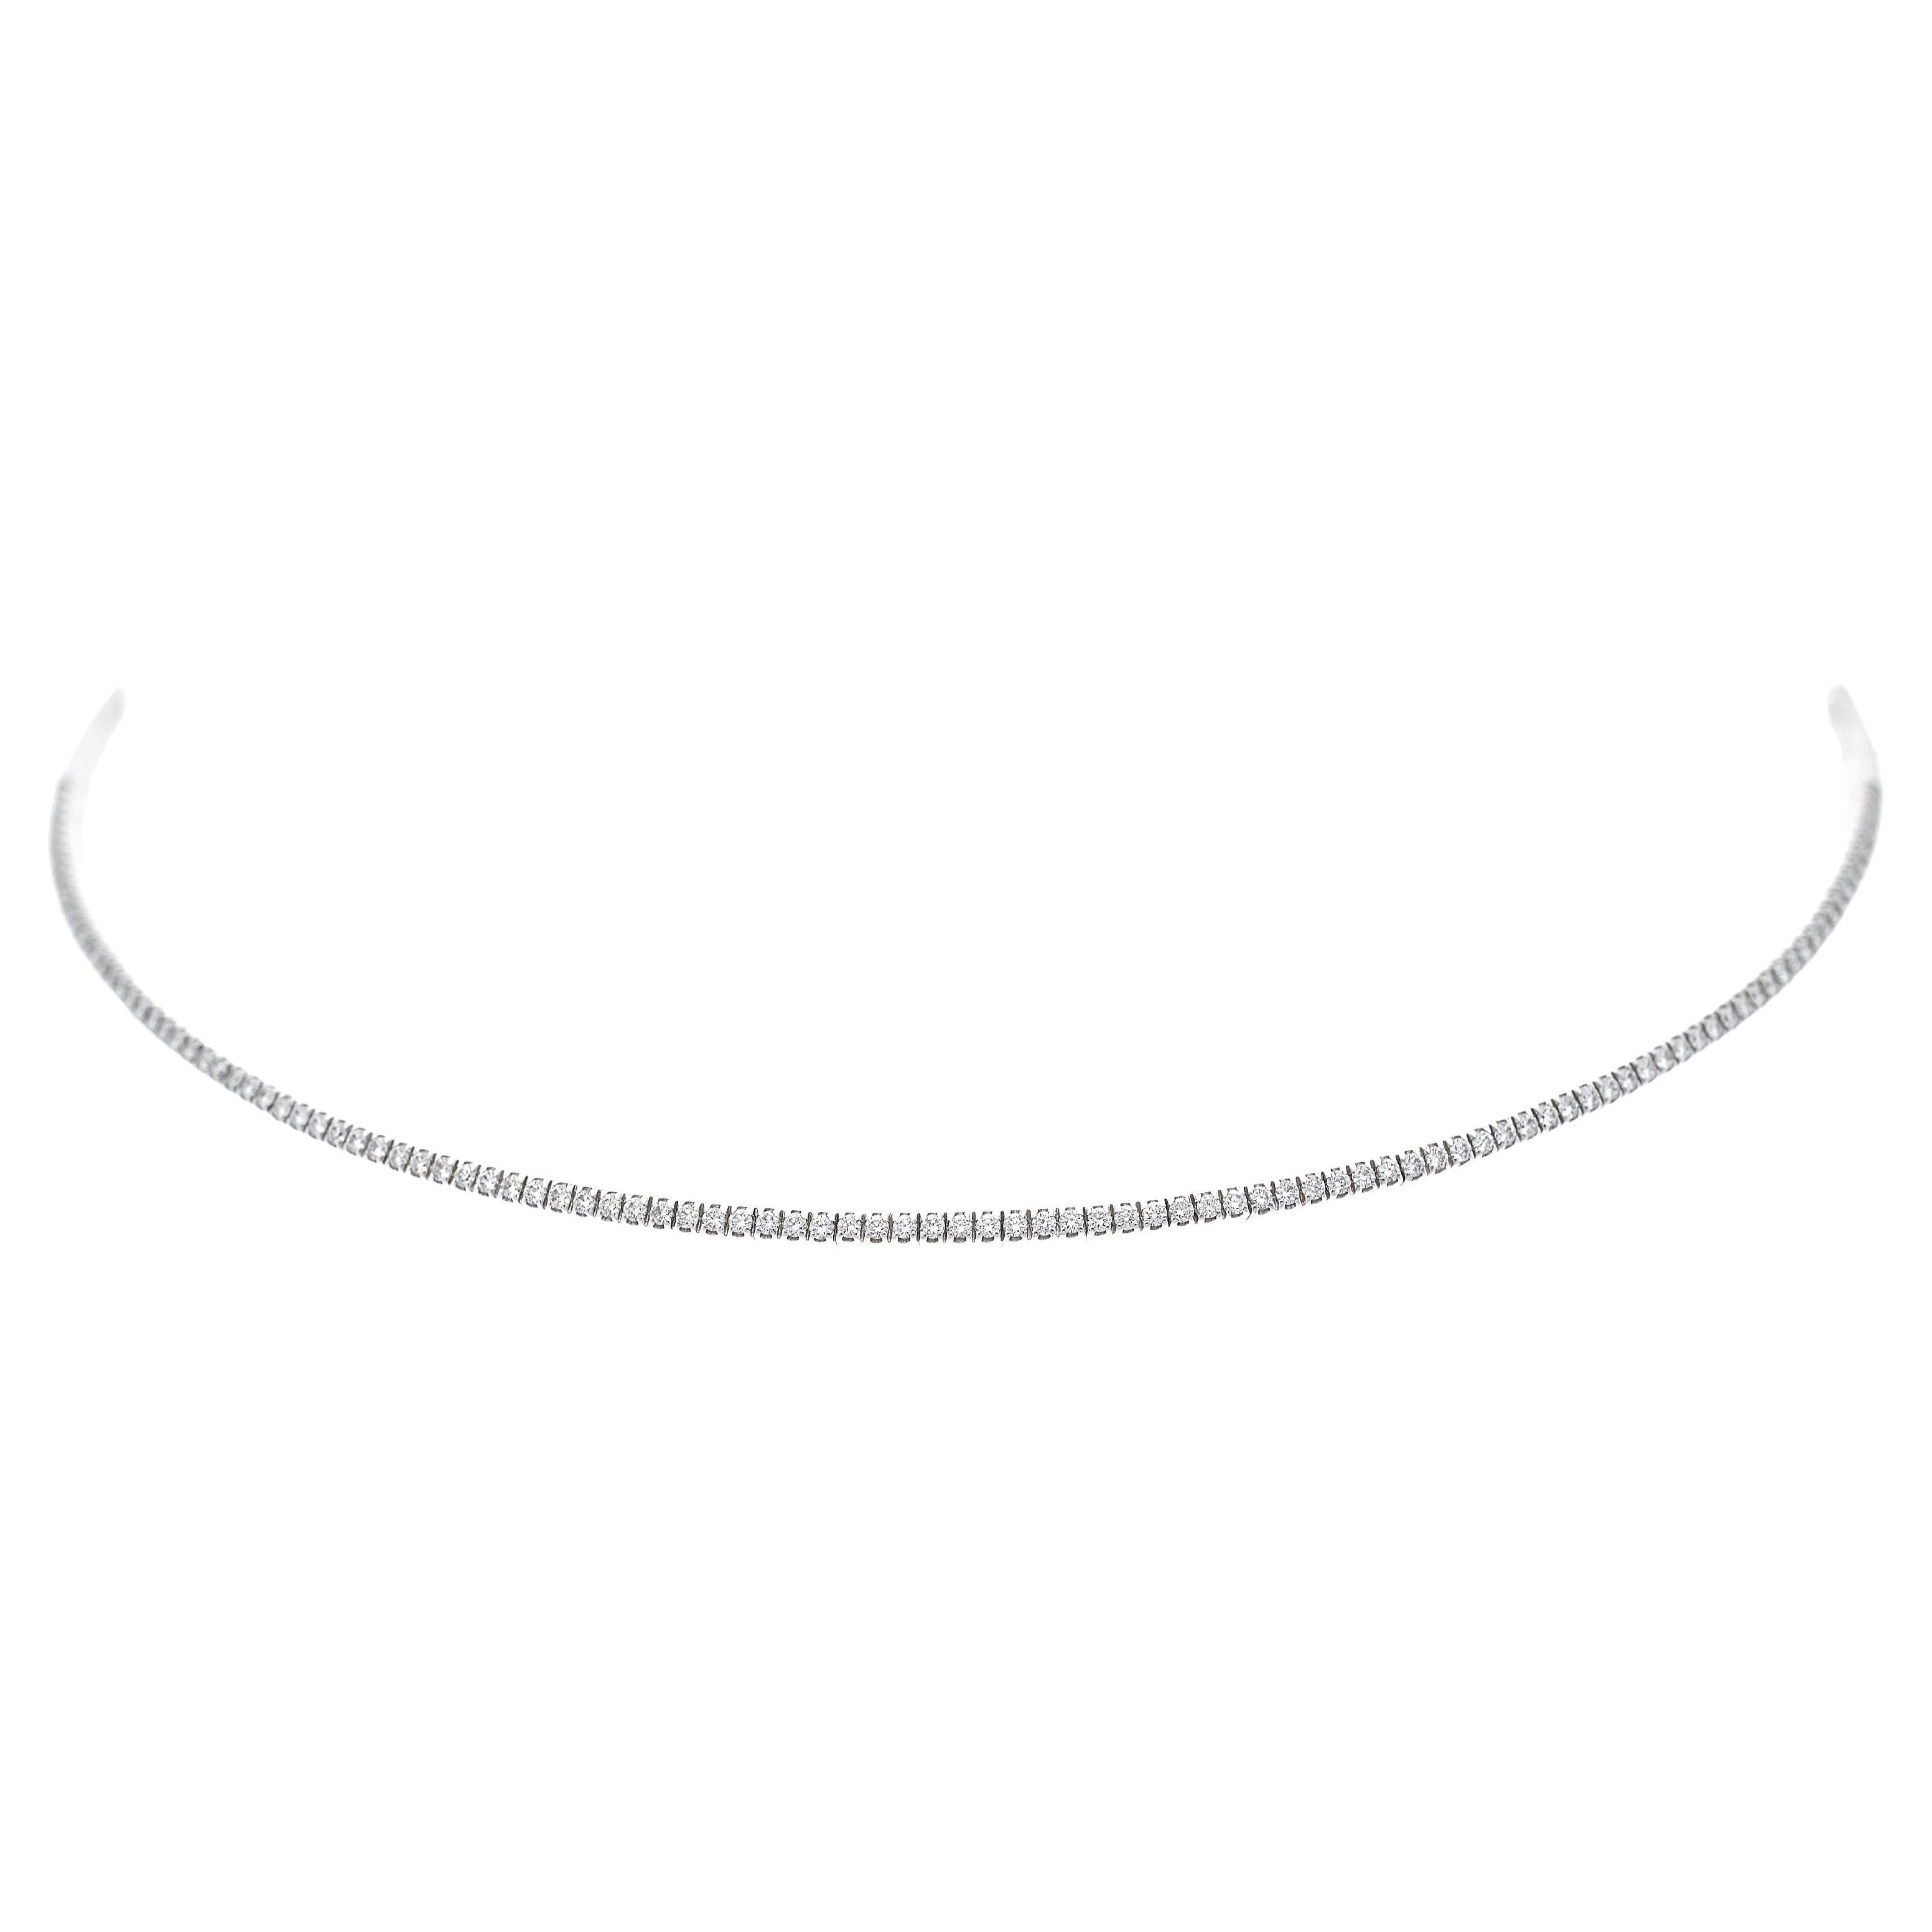 Diamonds 1.48 ct. Contemporary Chocker Necklace in 18 Kt Gold. Made in Italy